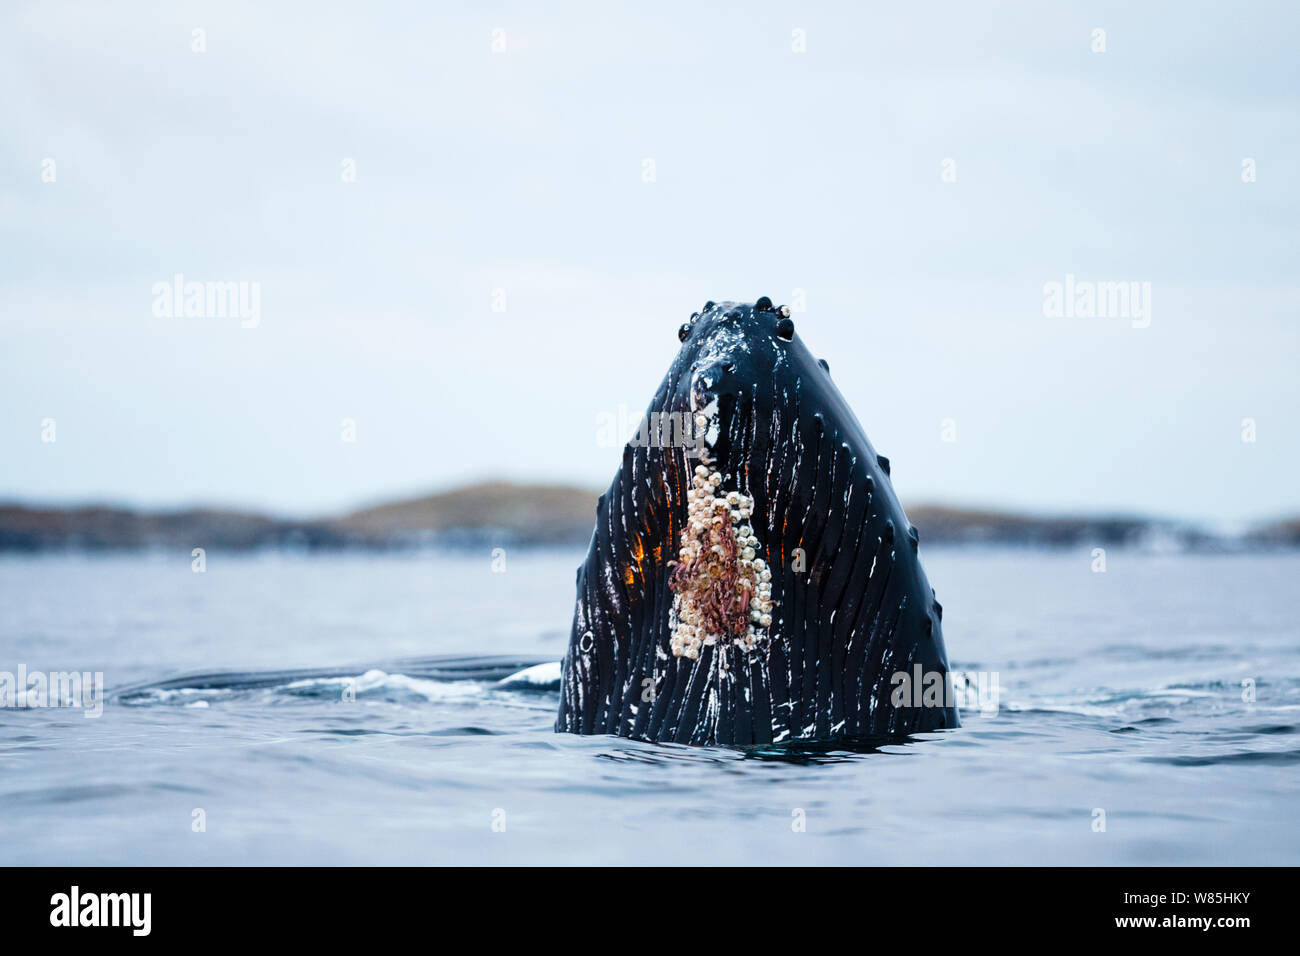 Close-up of a spyhopping Humpback whale (Megaptera novaeangliae) showing details on head. Andfjorden close to Senja, Troms, Northern Norway. January. Stock Photo